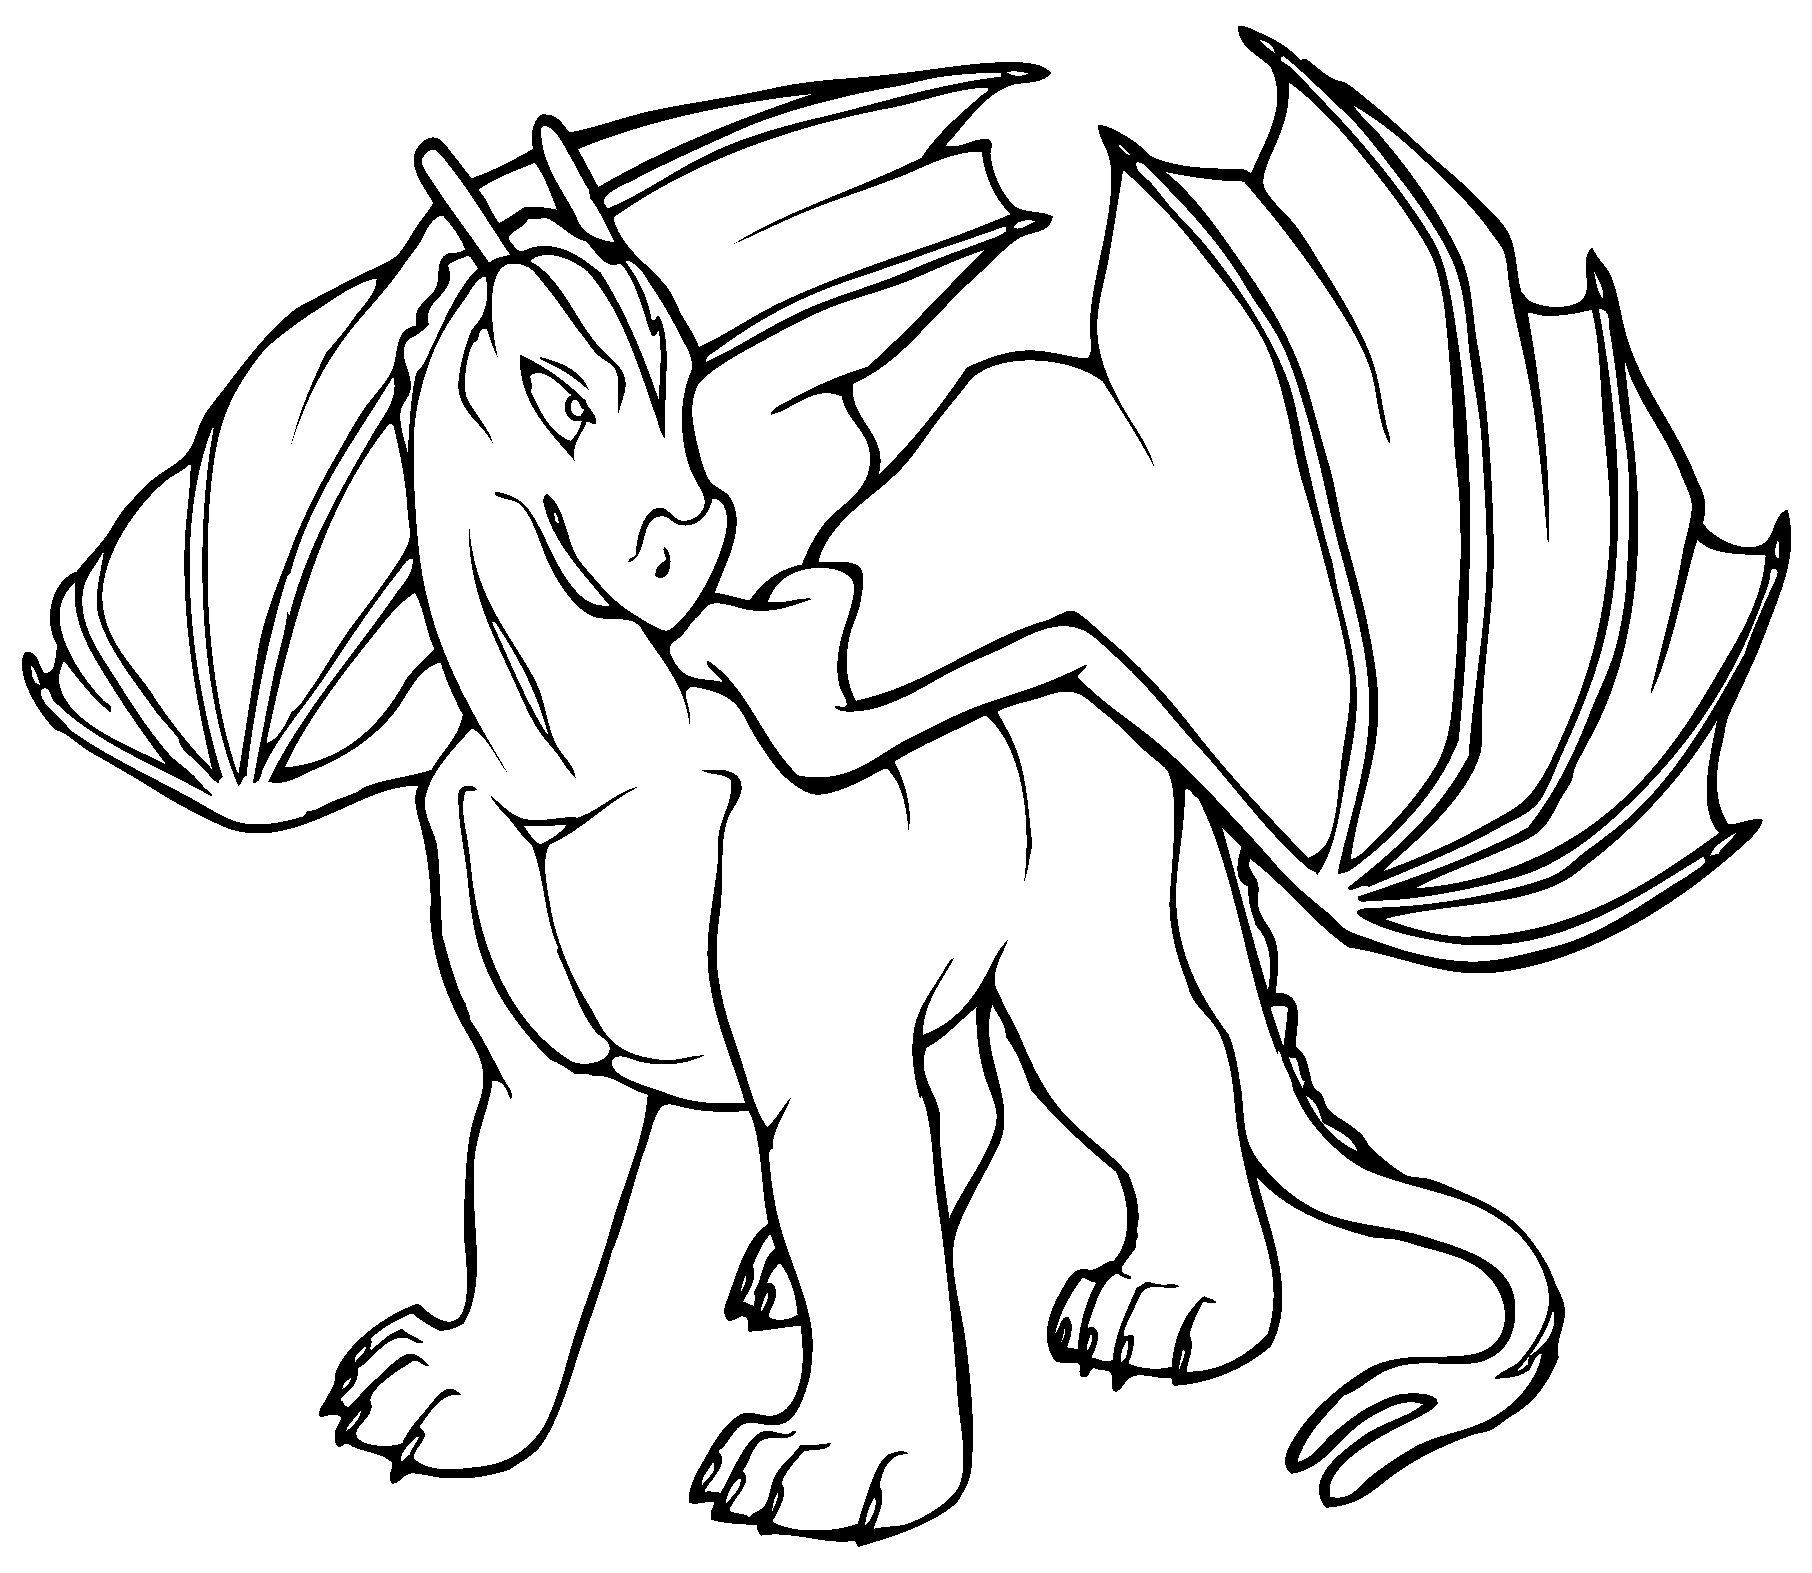 Coloring page: Dragon (Characters) #148480 - Printable coloring pages